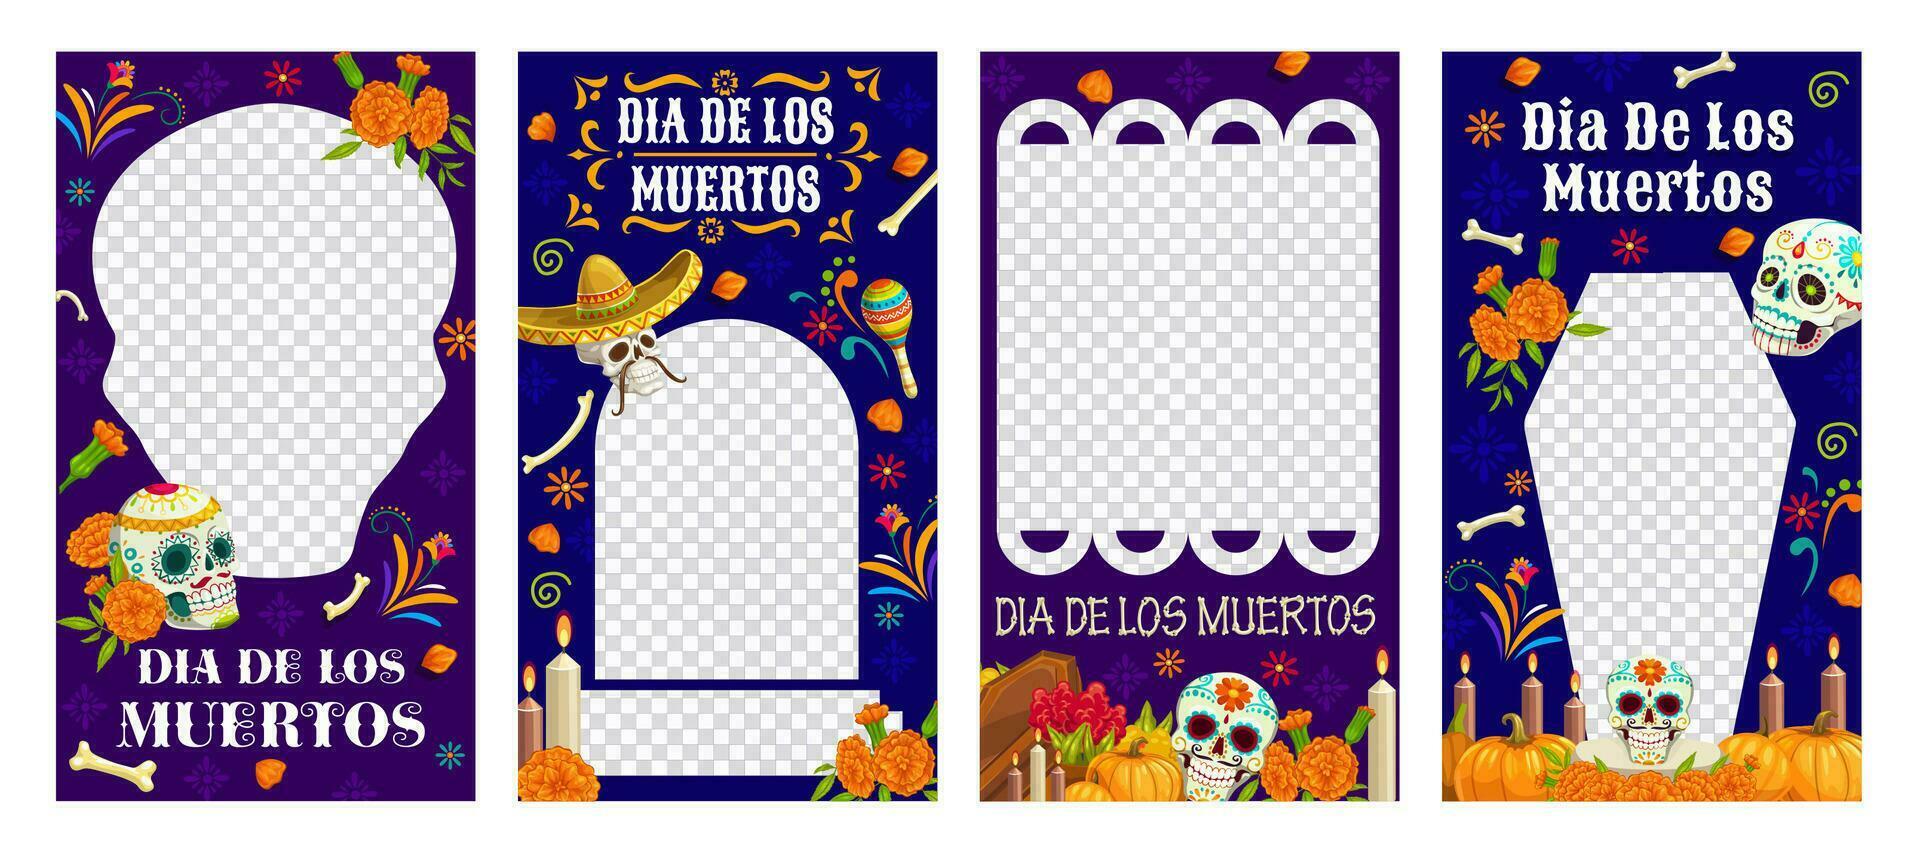 Mexican Day of Dead holiday social media banners vector